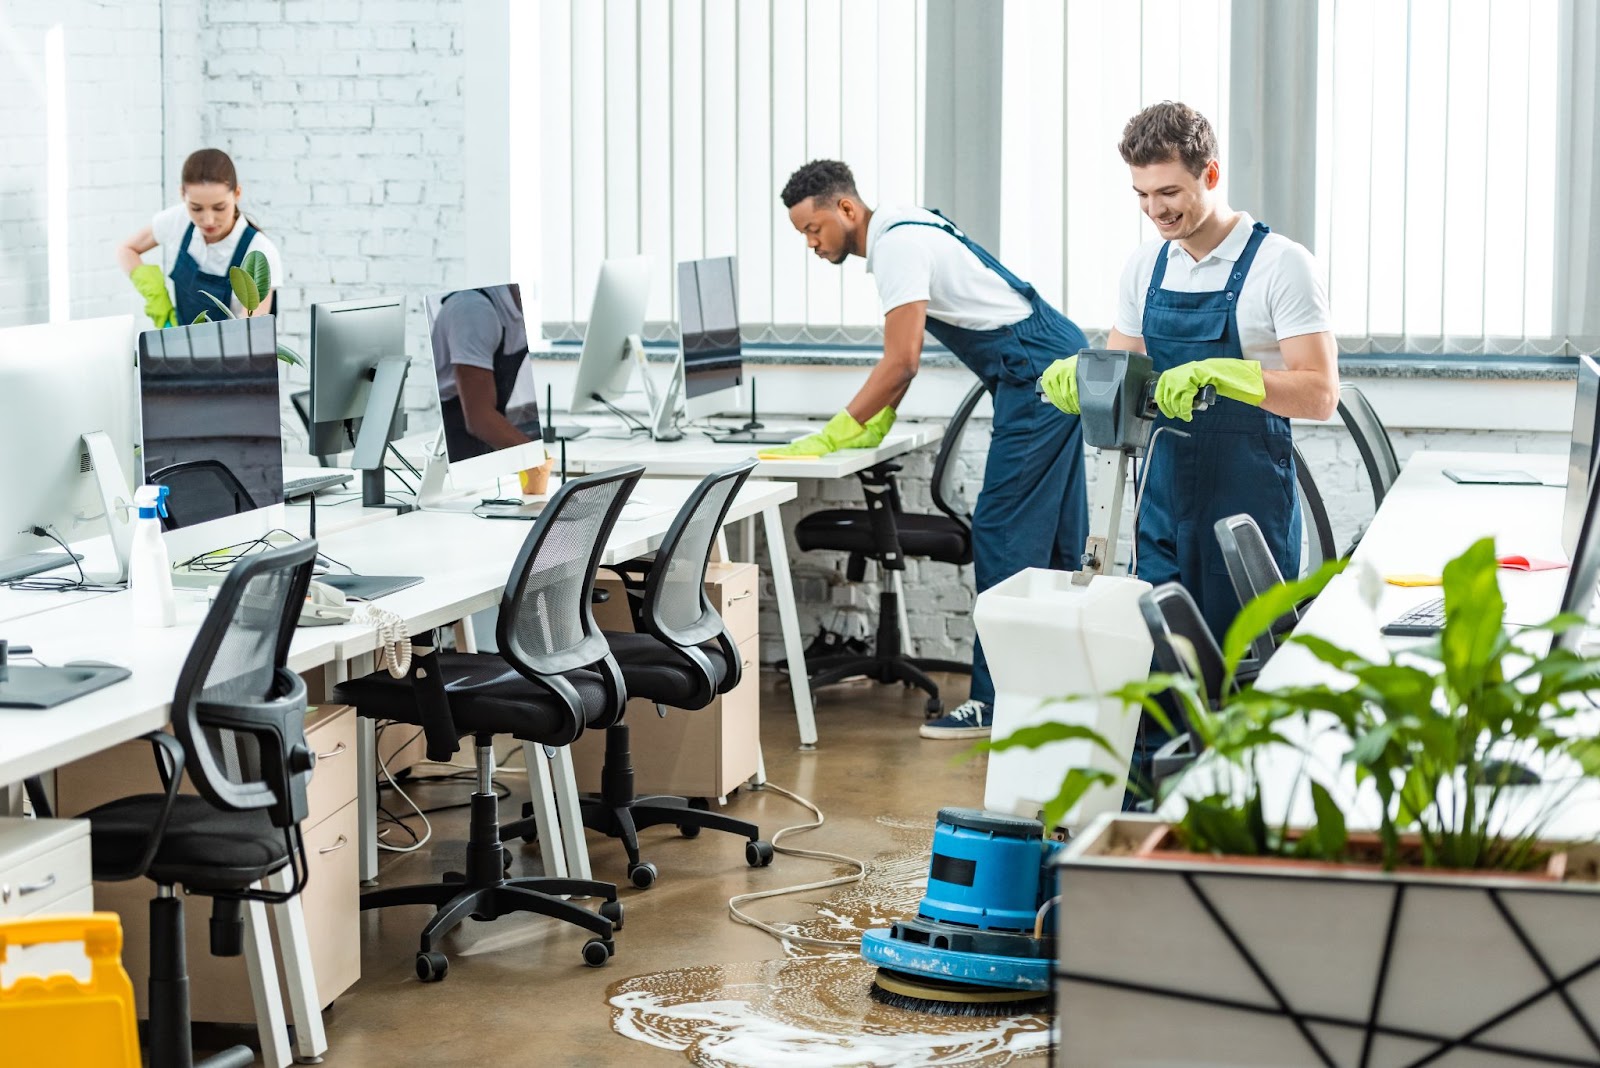 A team of professional cleaners power-washing office floors.